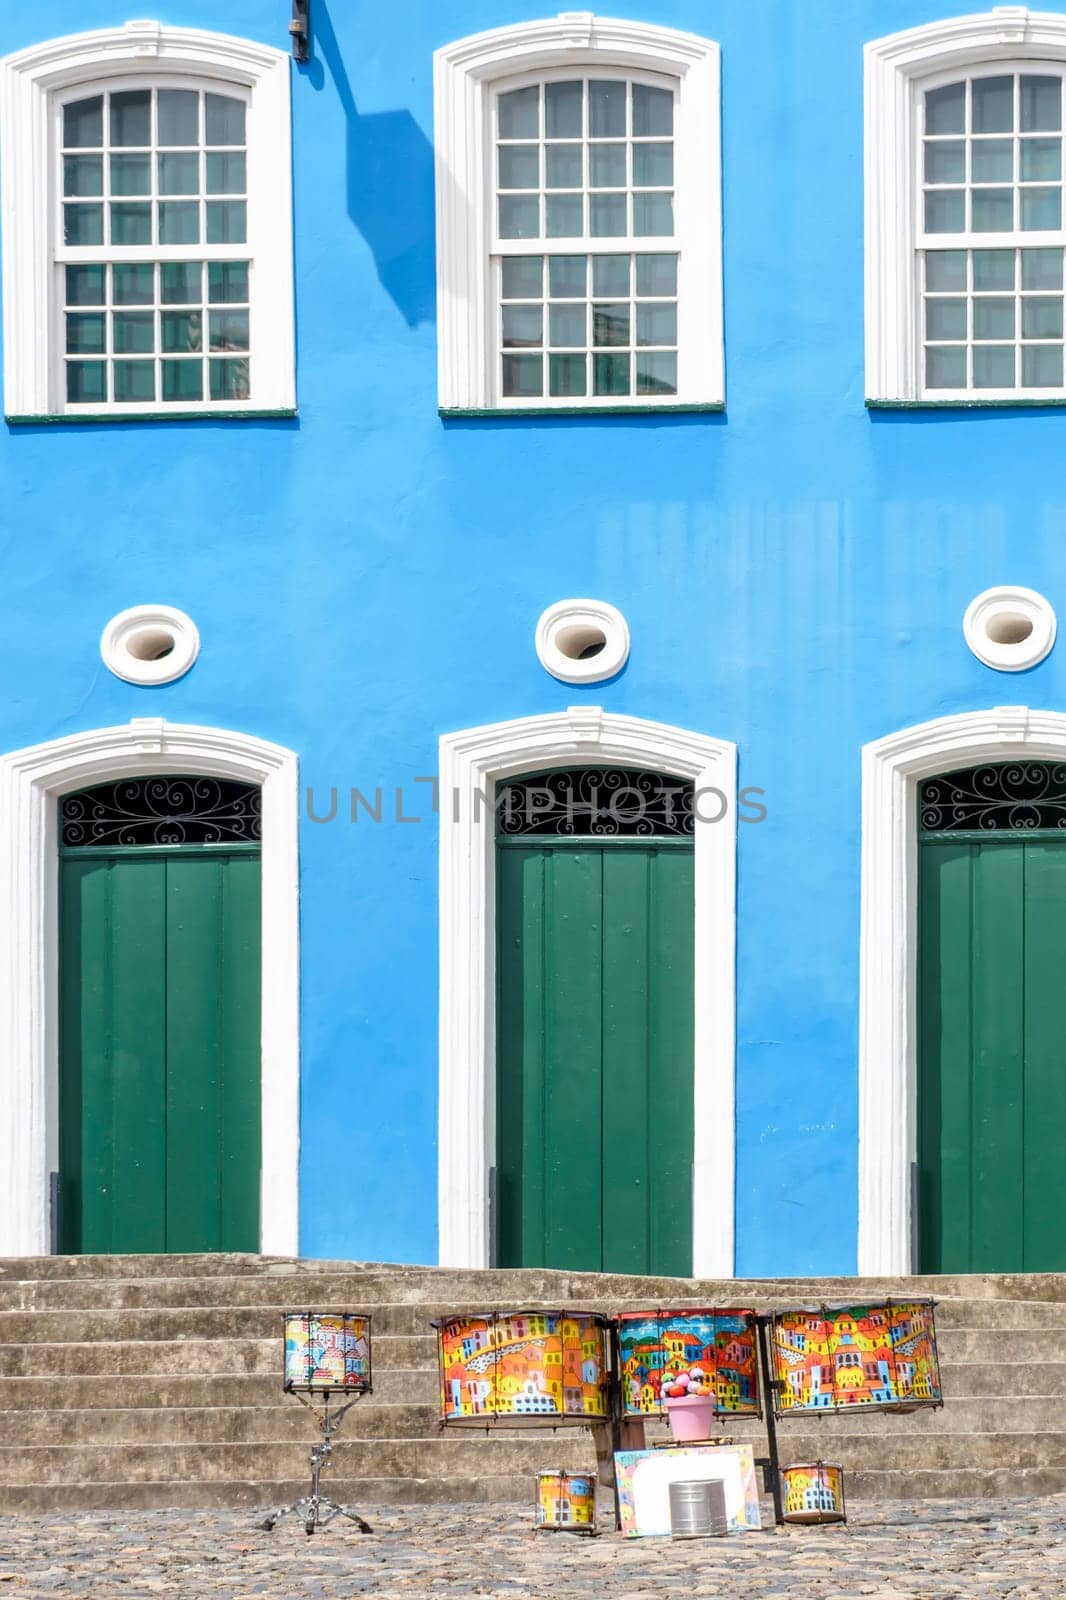 Colorful drums in front of colonial style facade by Fred_Pinheiro